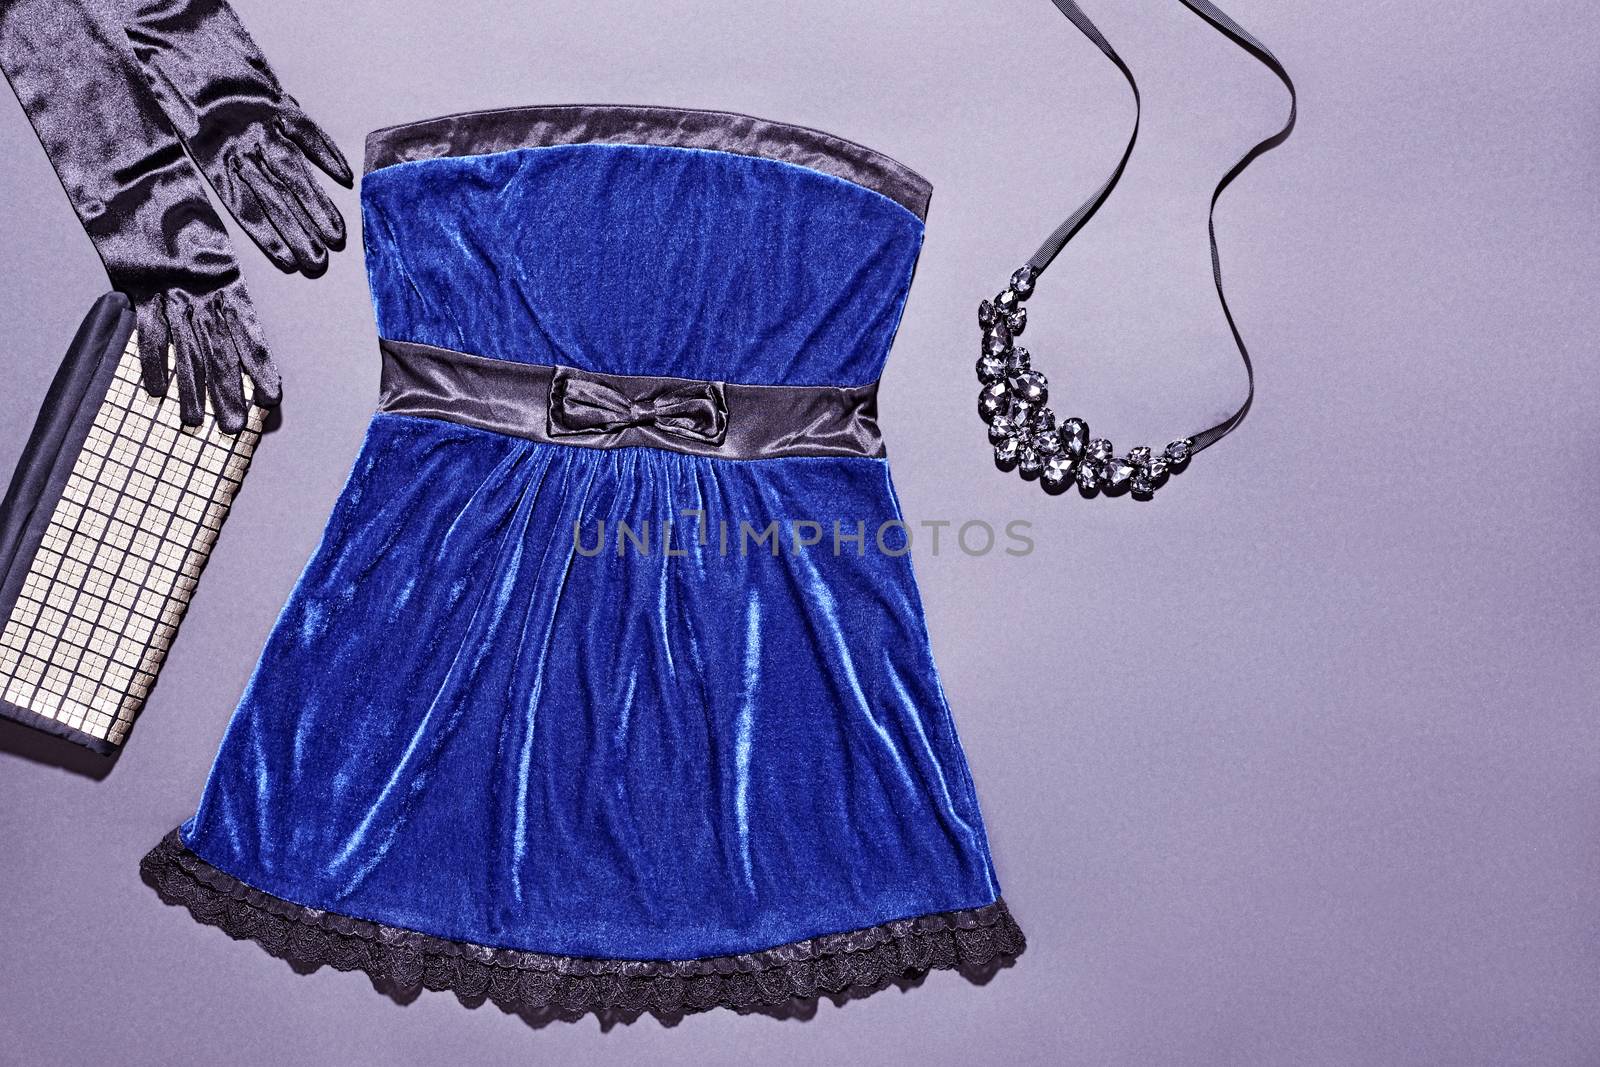 Fashion clothes stylish set, blue mini dress and accessories. Glamor creative, trendy black gloves and shiny clutch, luxury necklaces.  Unusual elegant evening party style, copyspace